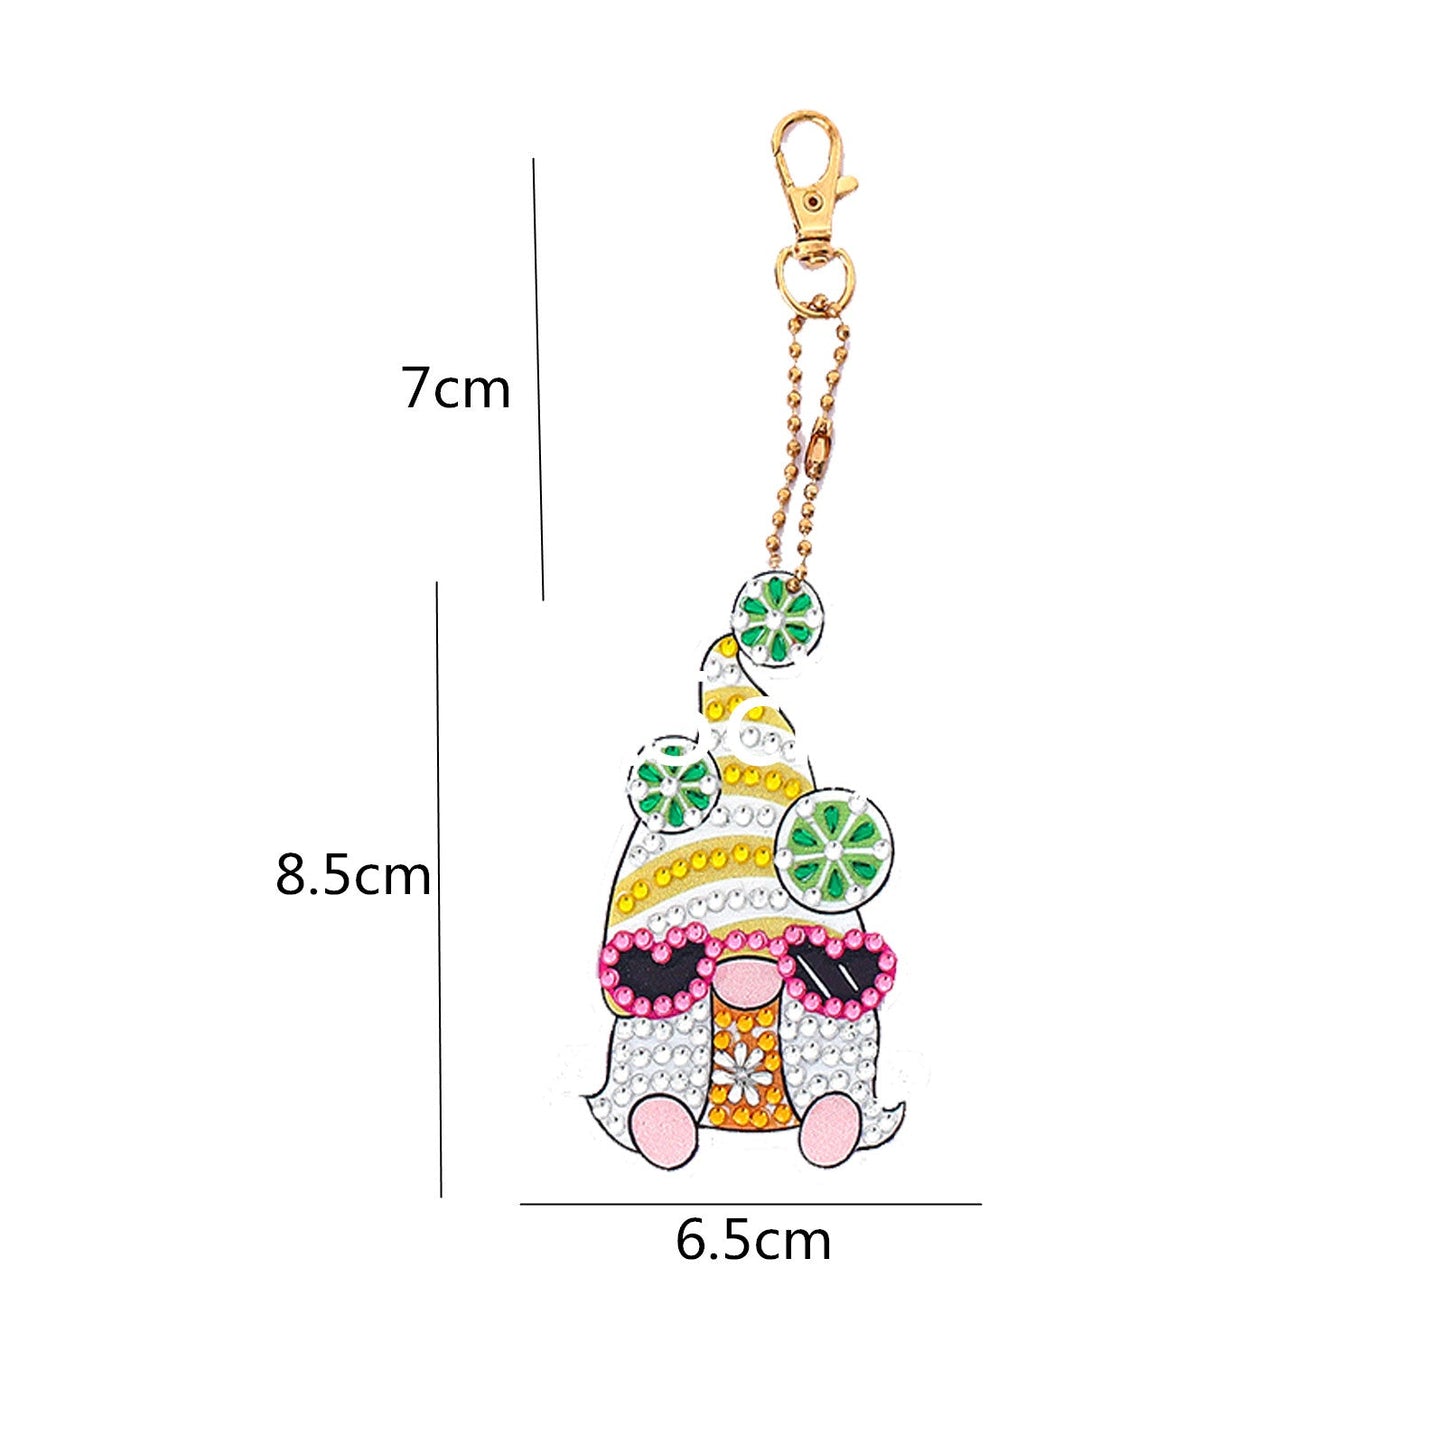 Blingbling's Keychain | Goblins | Five Piece Set